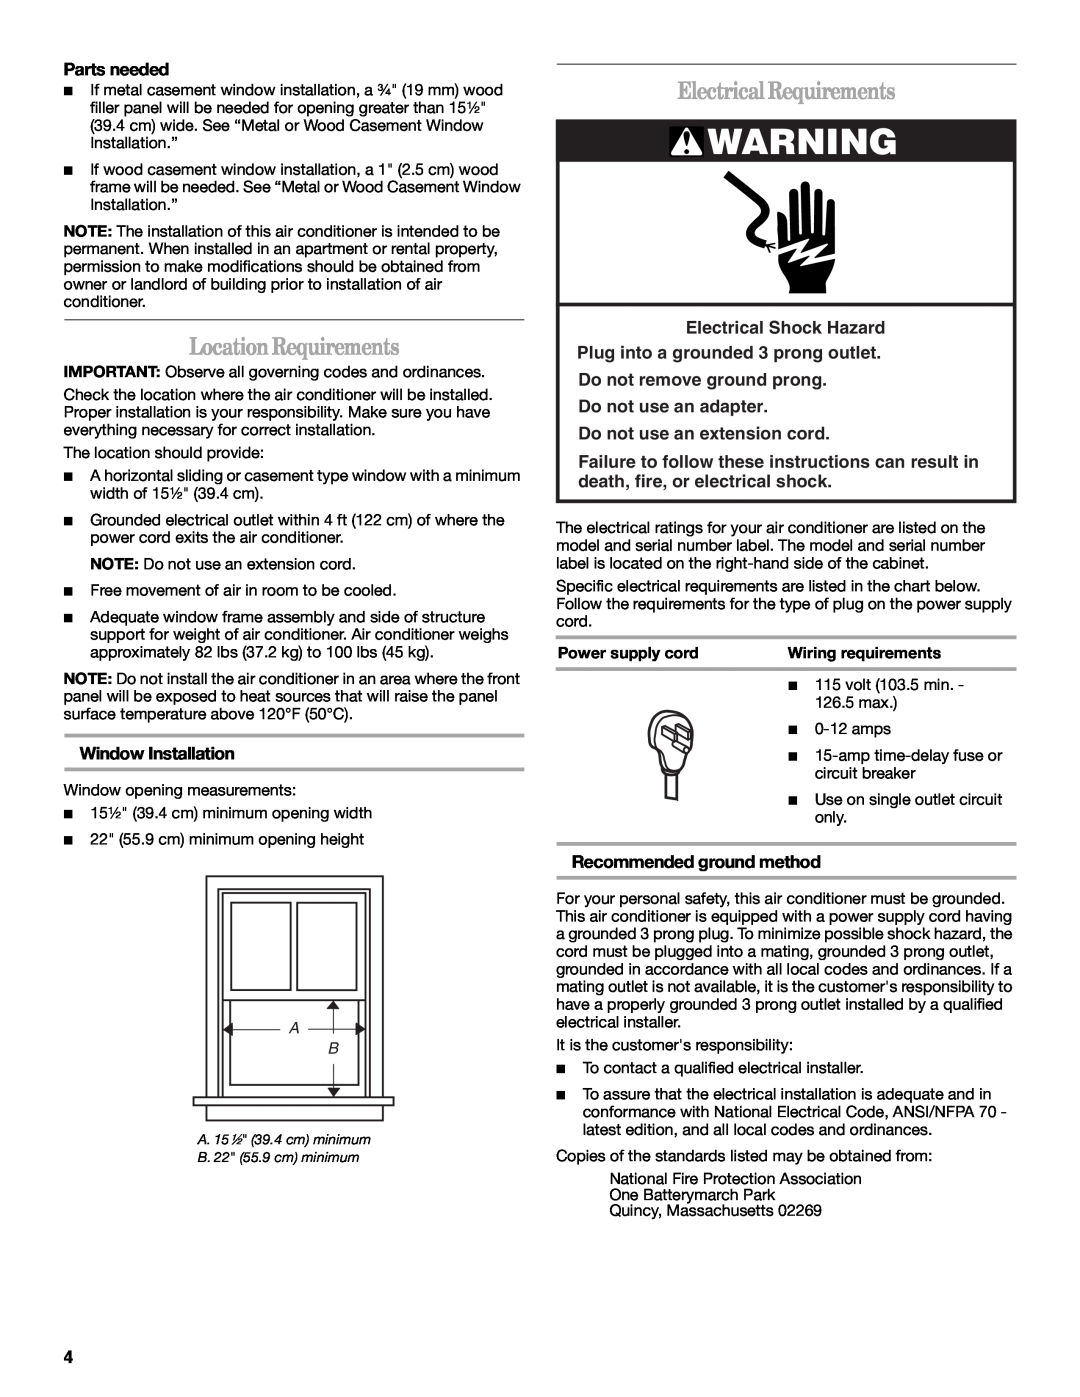 Whirlpool ACS088PR0 manual LocationRequirements, Electrical Requirements, Parts needed, Window Installation 